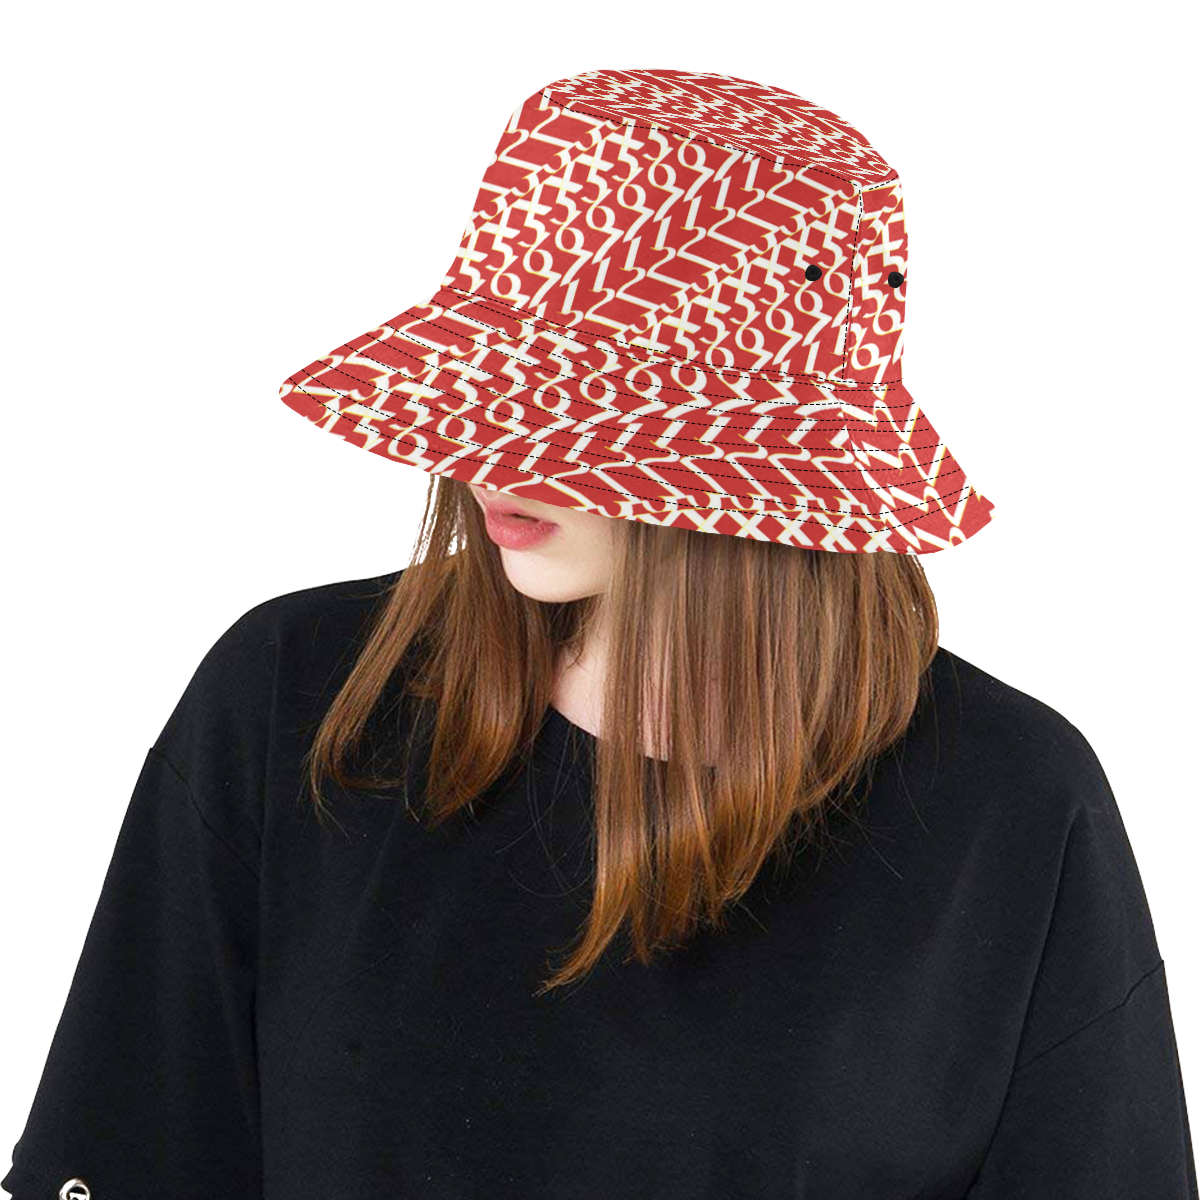 NUMBERS Collection 1234567 Lava Red All Over Print Bucket Hat